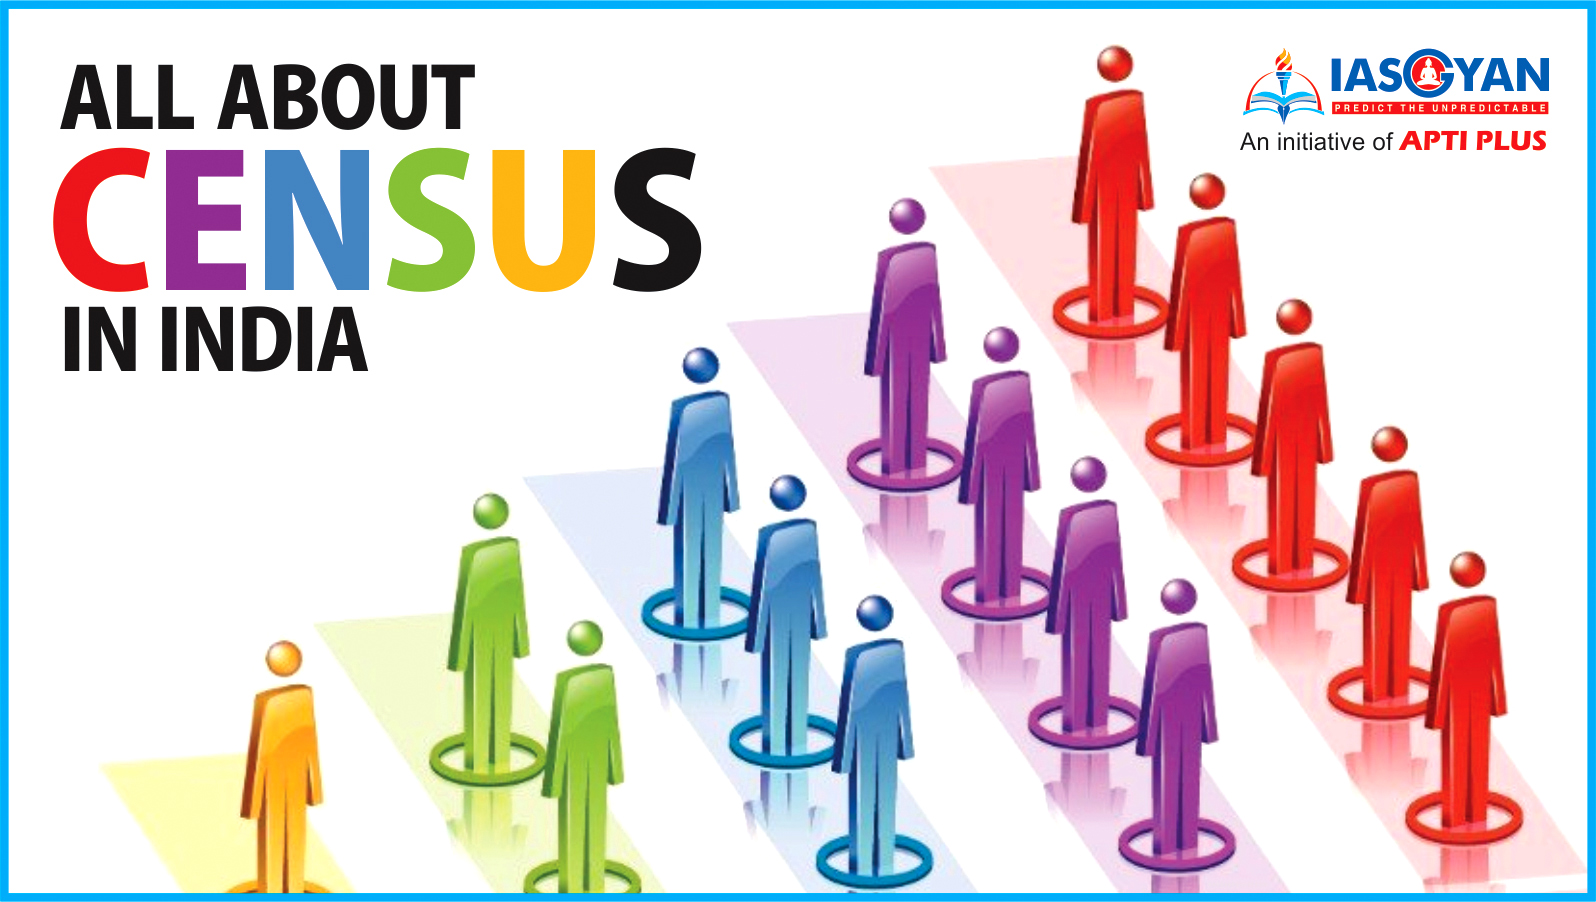 ALL ABOUT CENSUS IN INDIA